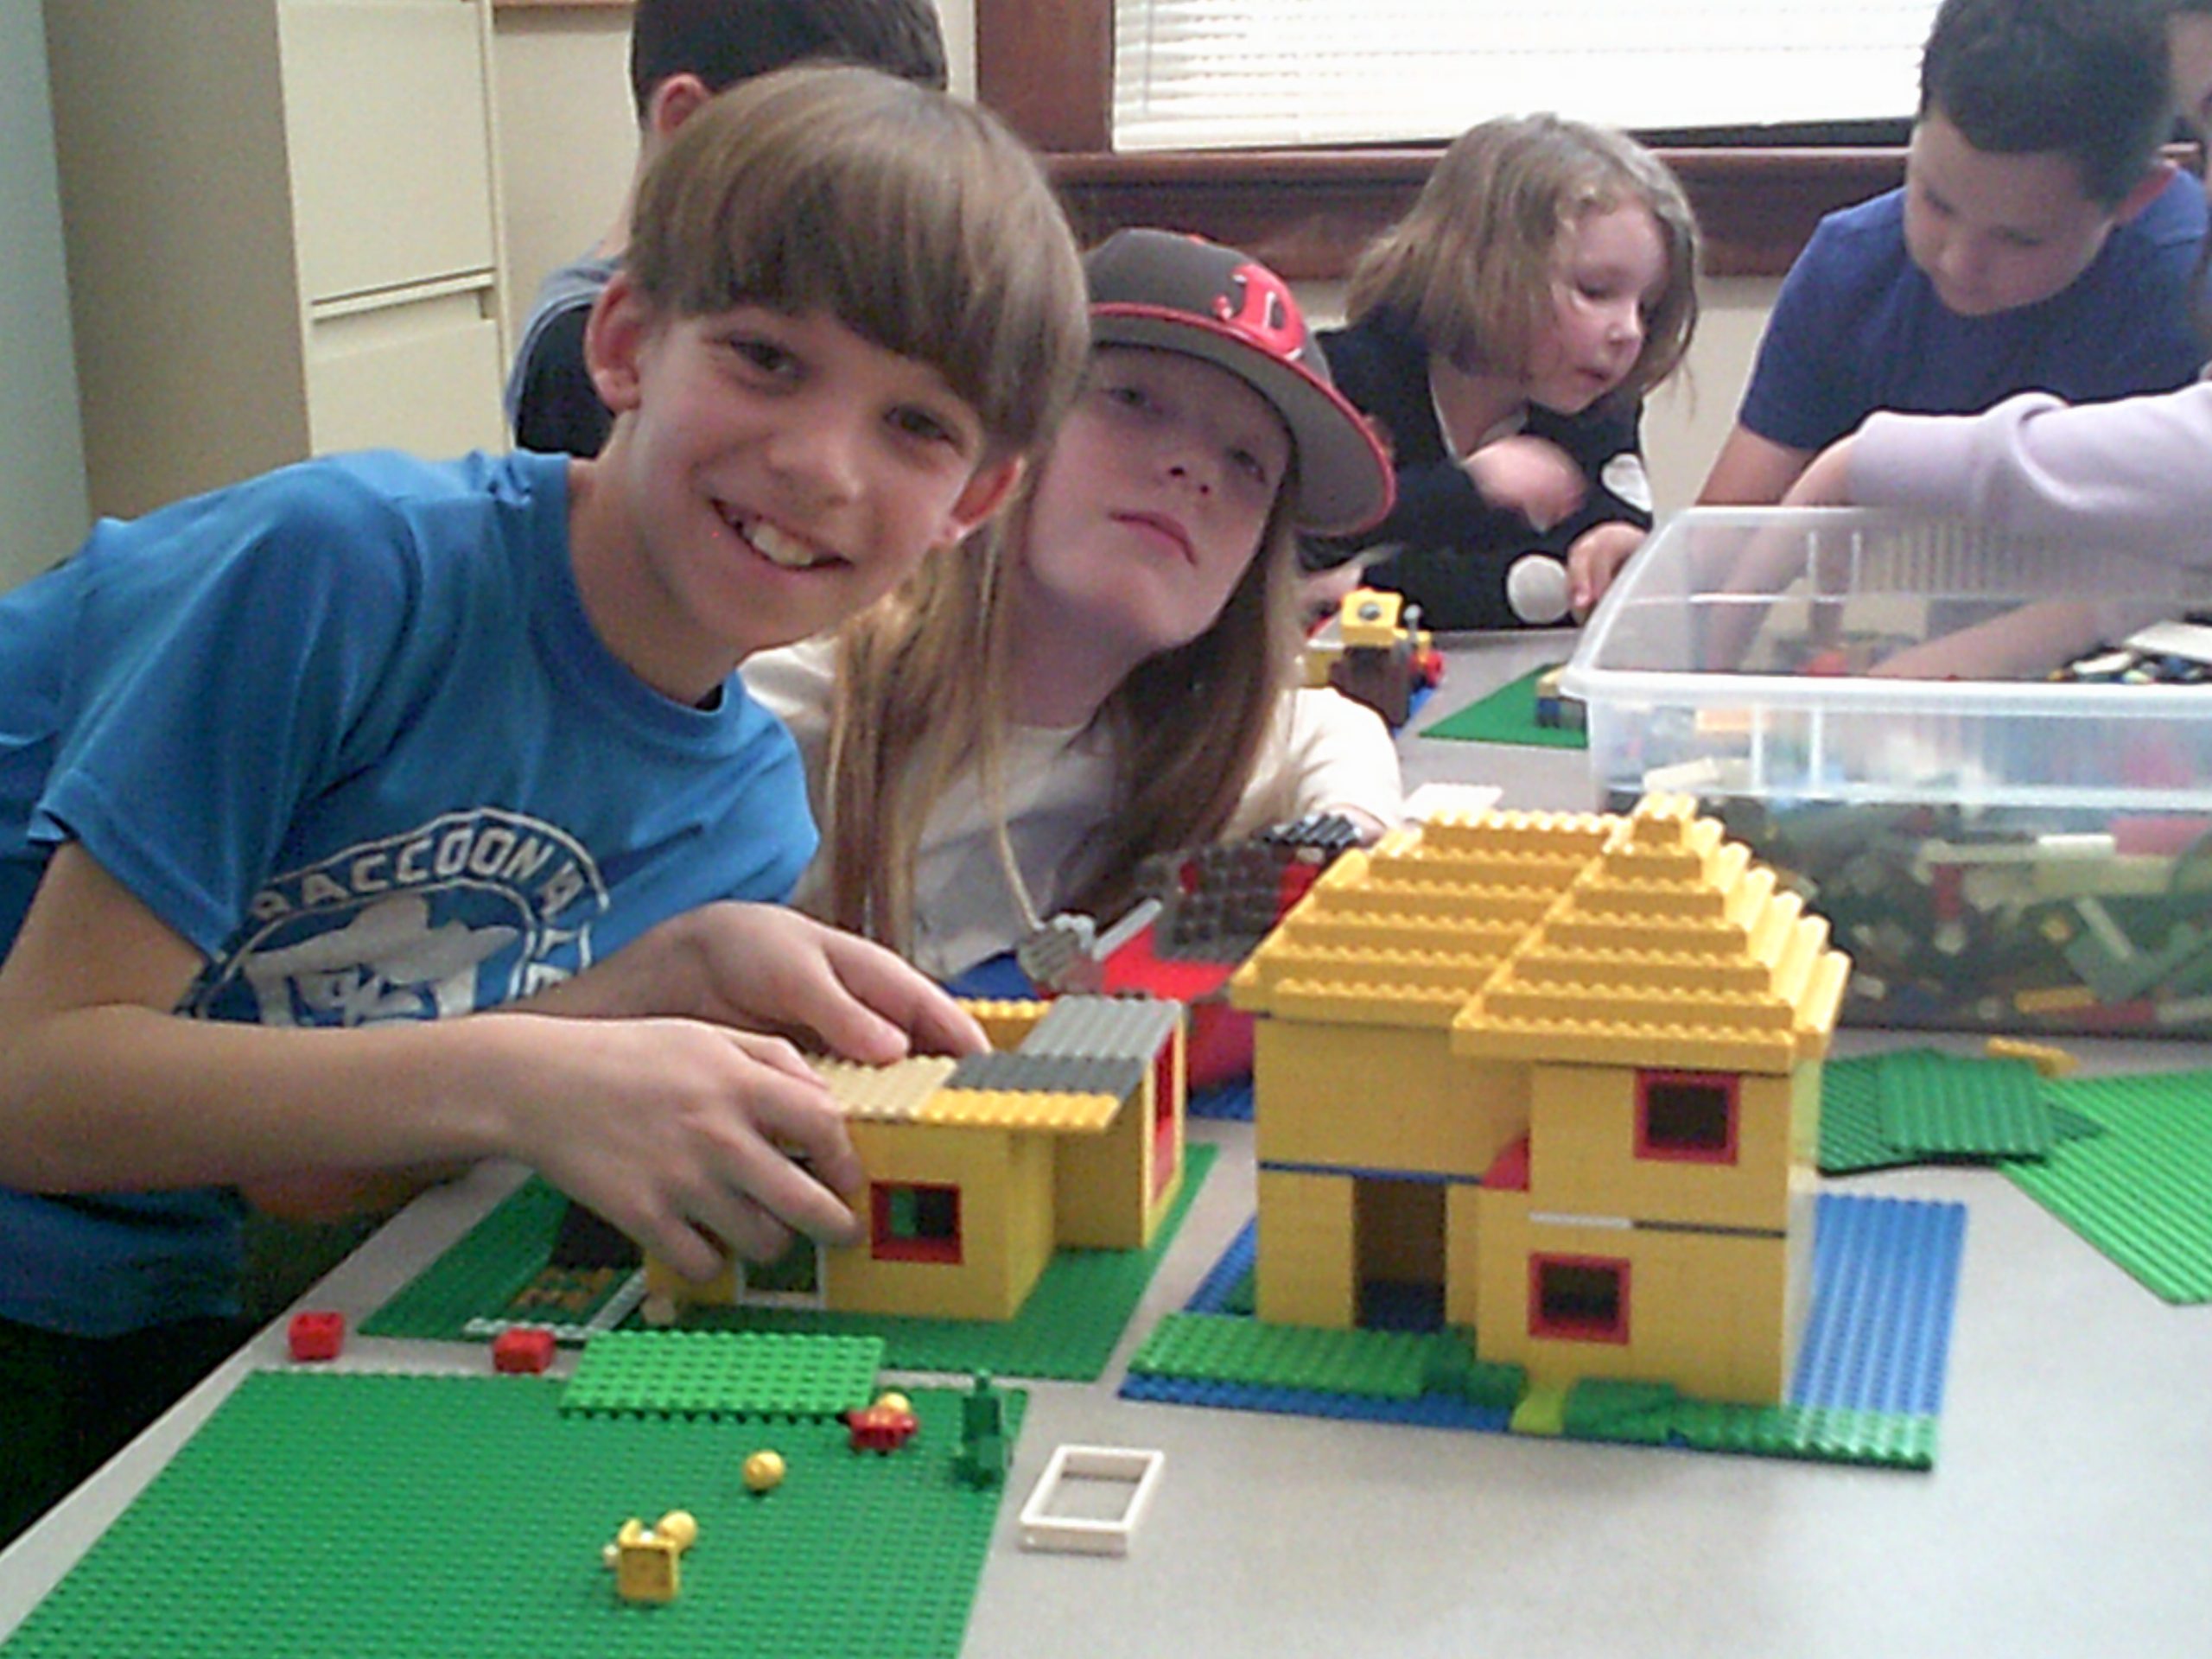 Students pose with their creations during Lego Club.